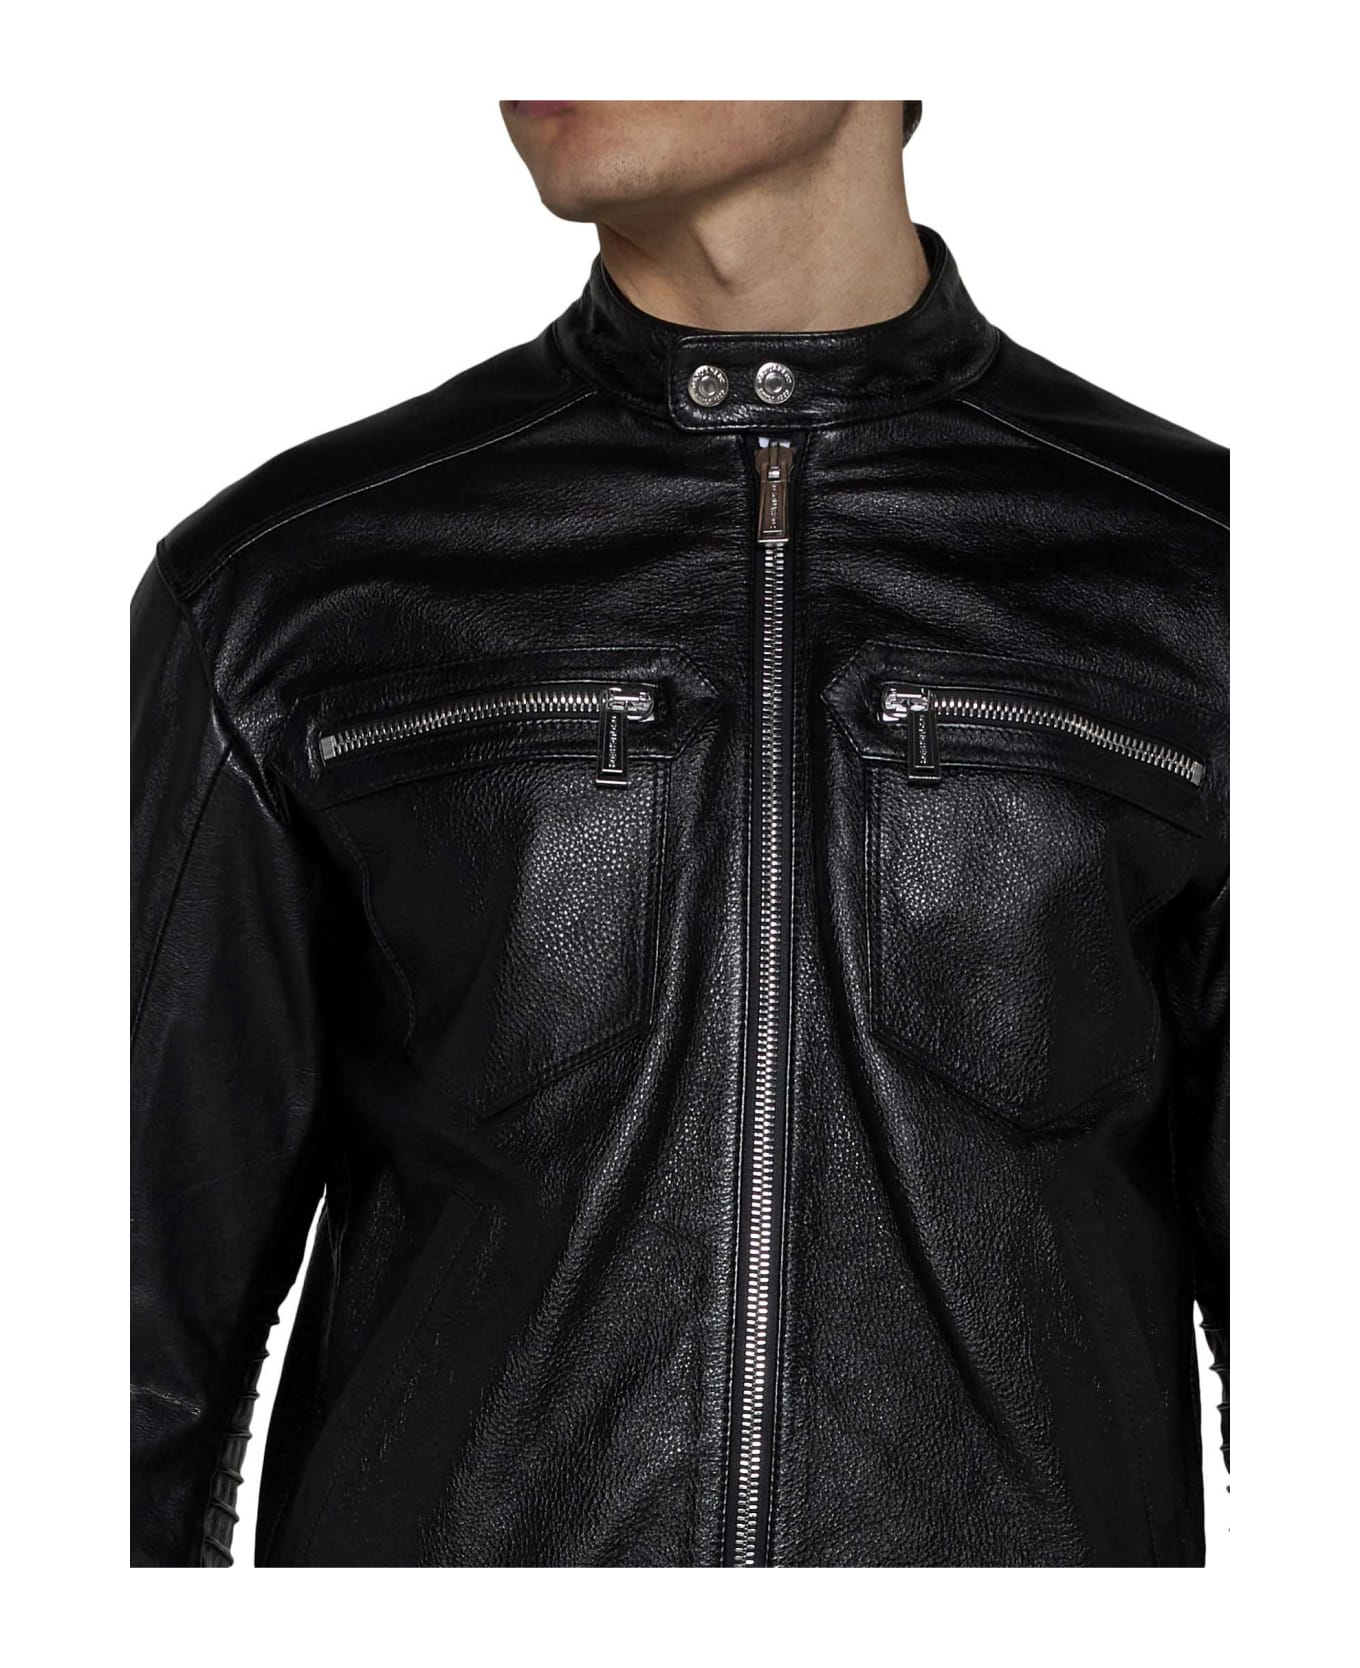 Dsquared2 Jacket - Col. 900 [090]